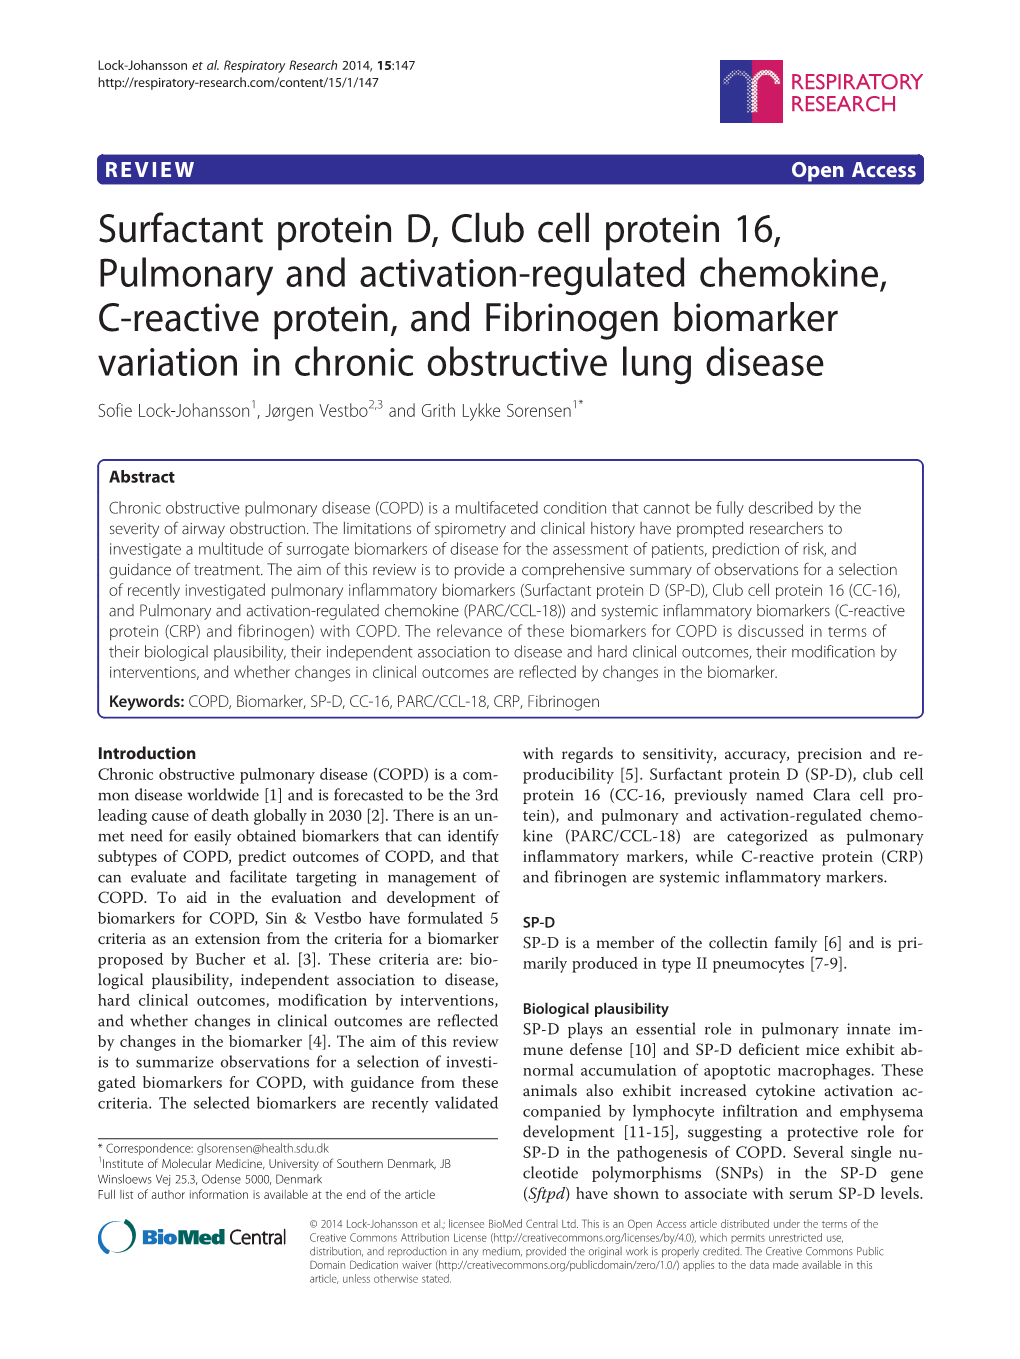 Surfactant Protein D, Club Cell Protein 16, Pulmonary and Activation